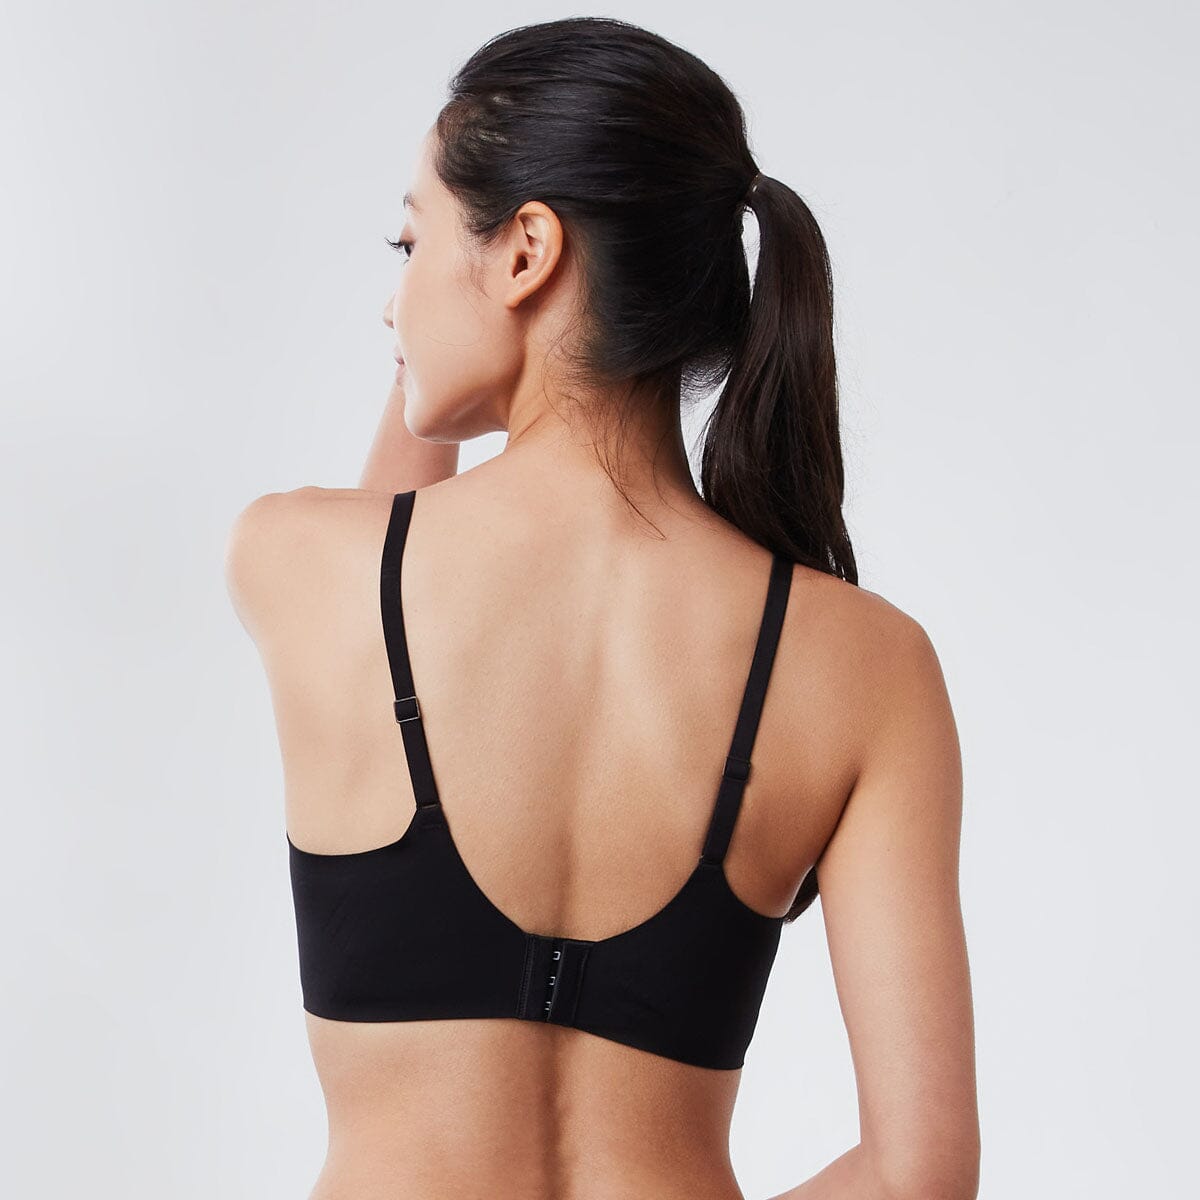 Solution Mega W-Shape Support REsiltech™ Wing Non Wired Lace Bra Bra Her Own Words 